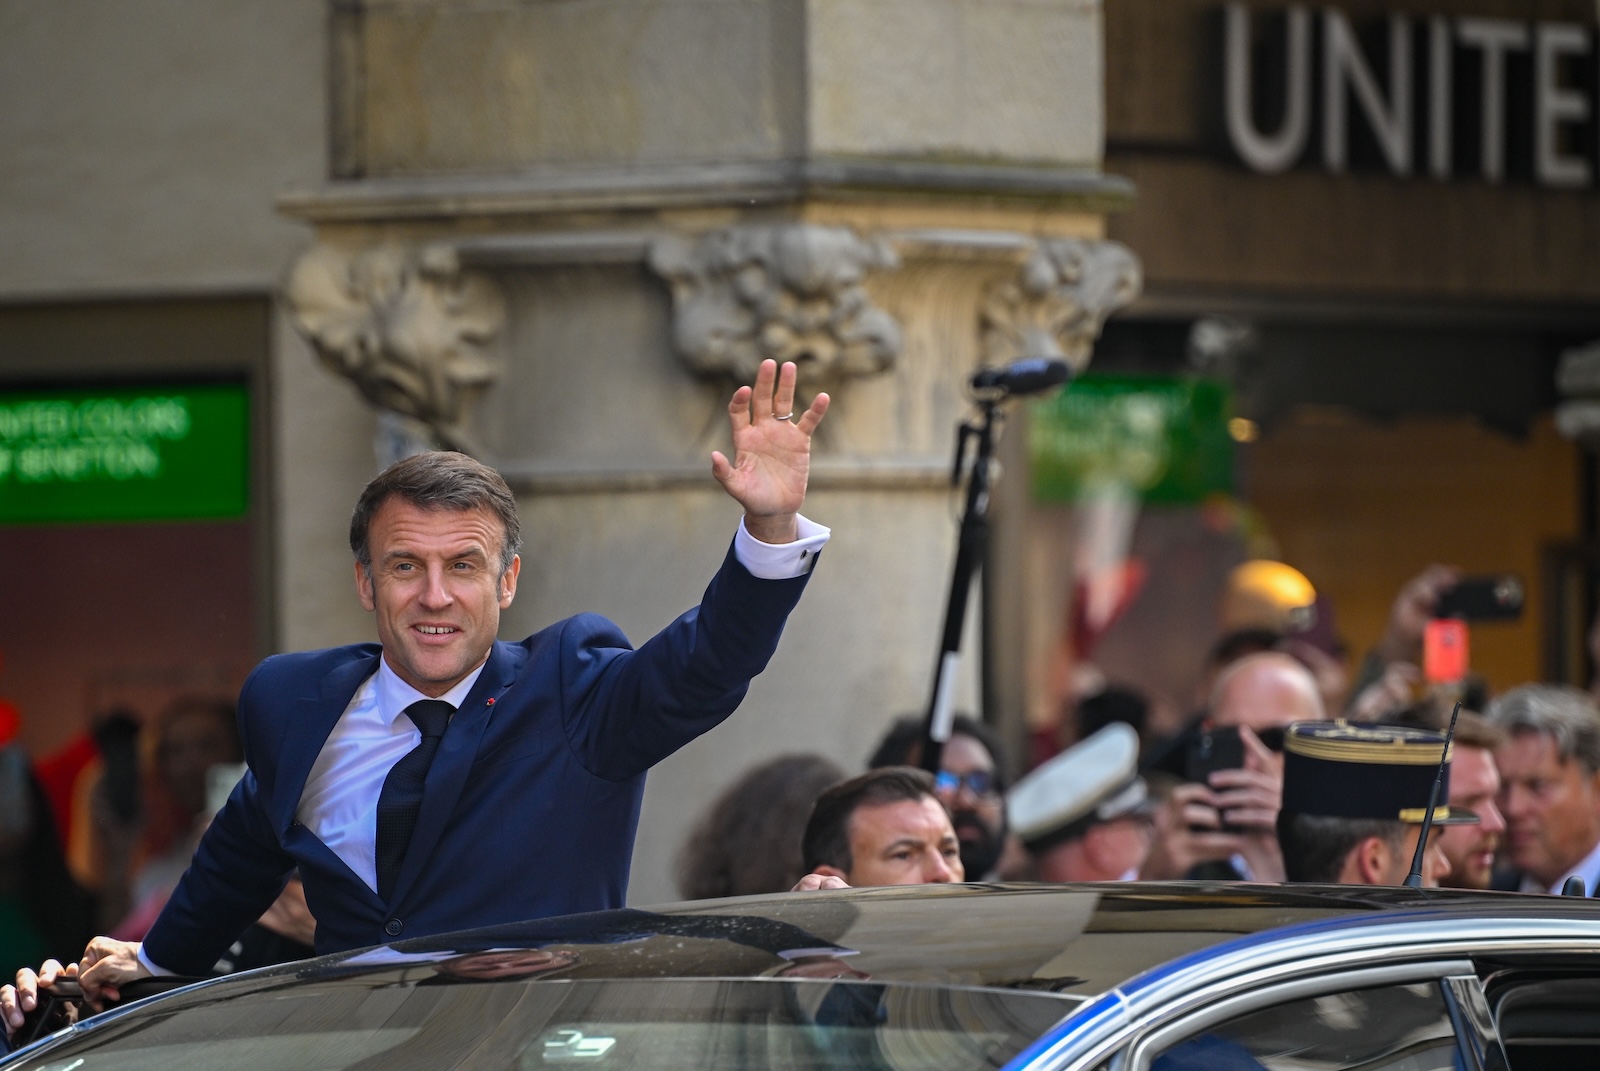 epa11375405 French President Emmanuel Macron (L) waves as he leaves the historical city hall on the third day of his state visit to Germany, in Muenster, Germany, 28 May 2024. Macron is on a three-day visit to Germany with stops in Berlin, Dresden, Moritzburg and Muenster. He will return to Berlin to take part in a gathering of the French and German governments at Meseberg Palace later on 28 May.  EPA/SASCHA SCHUERMANN / POOL